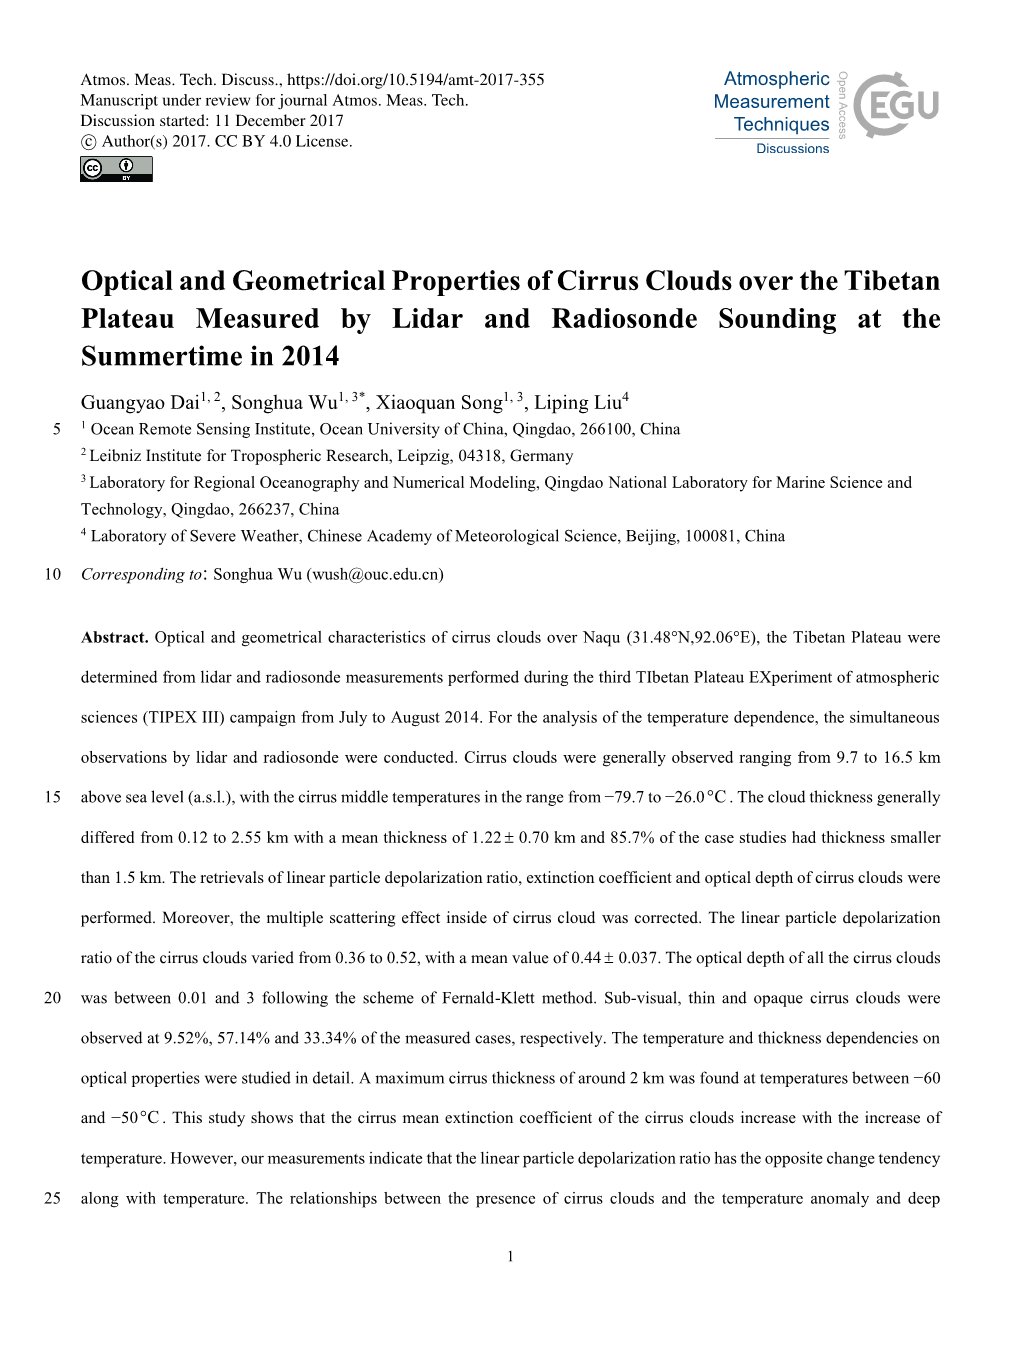 Optical and Geometrical Properties of Cirrus Clouds Over the Tibetan Plateau Measured by Lidar and Radiosonde Sounding at the Summertime in 2014